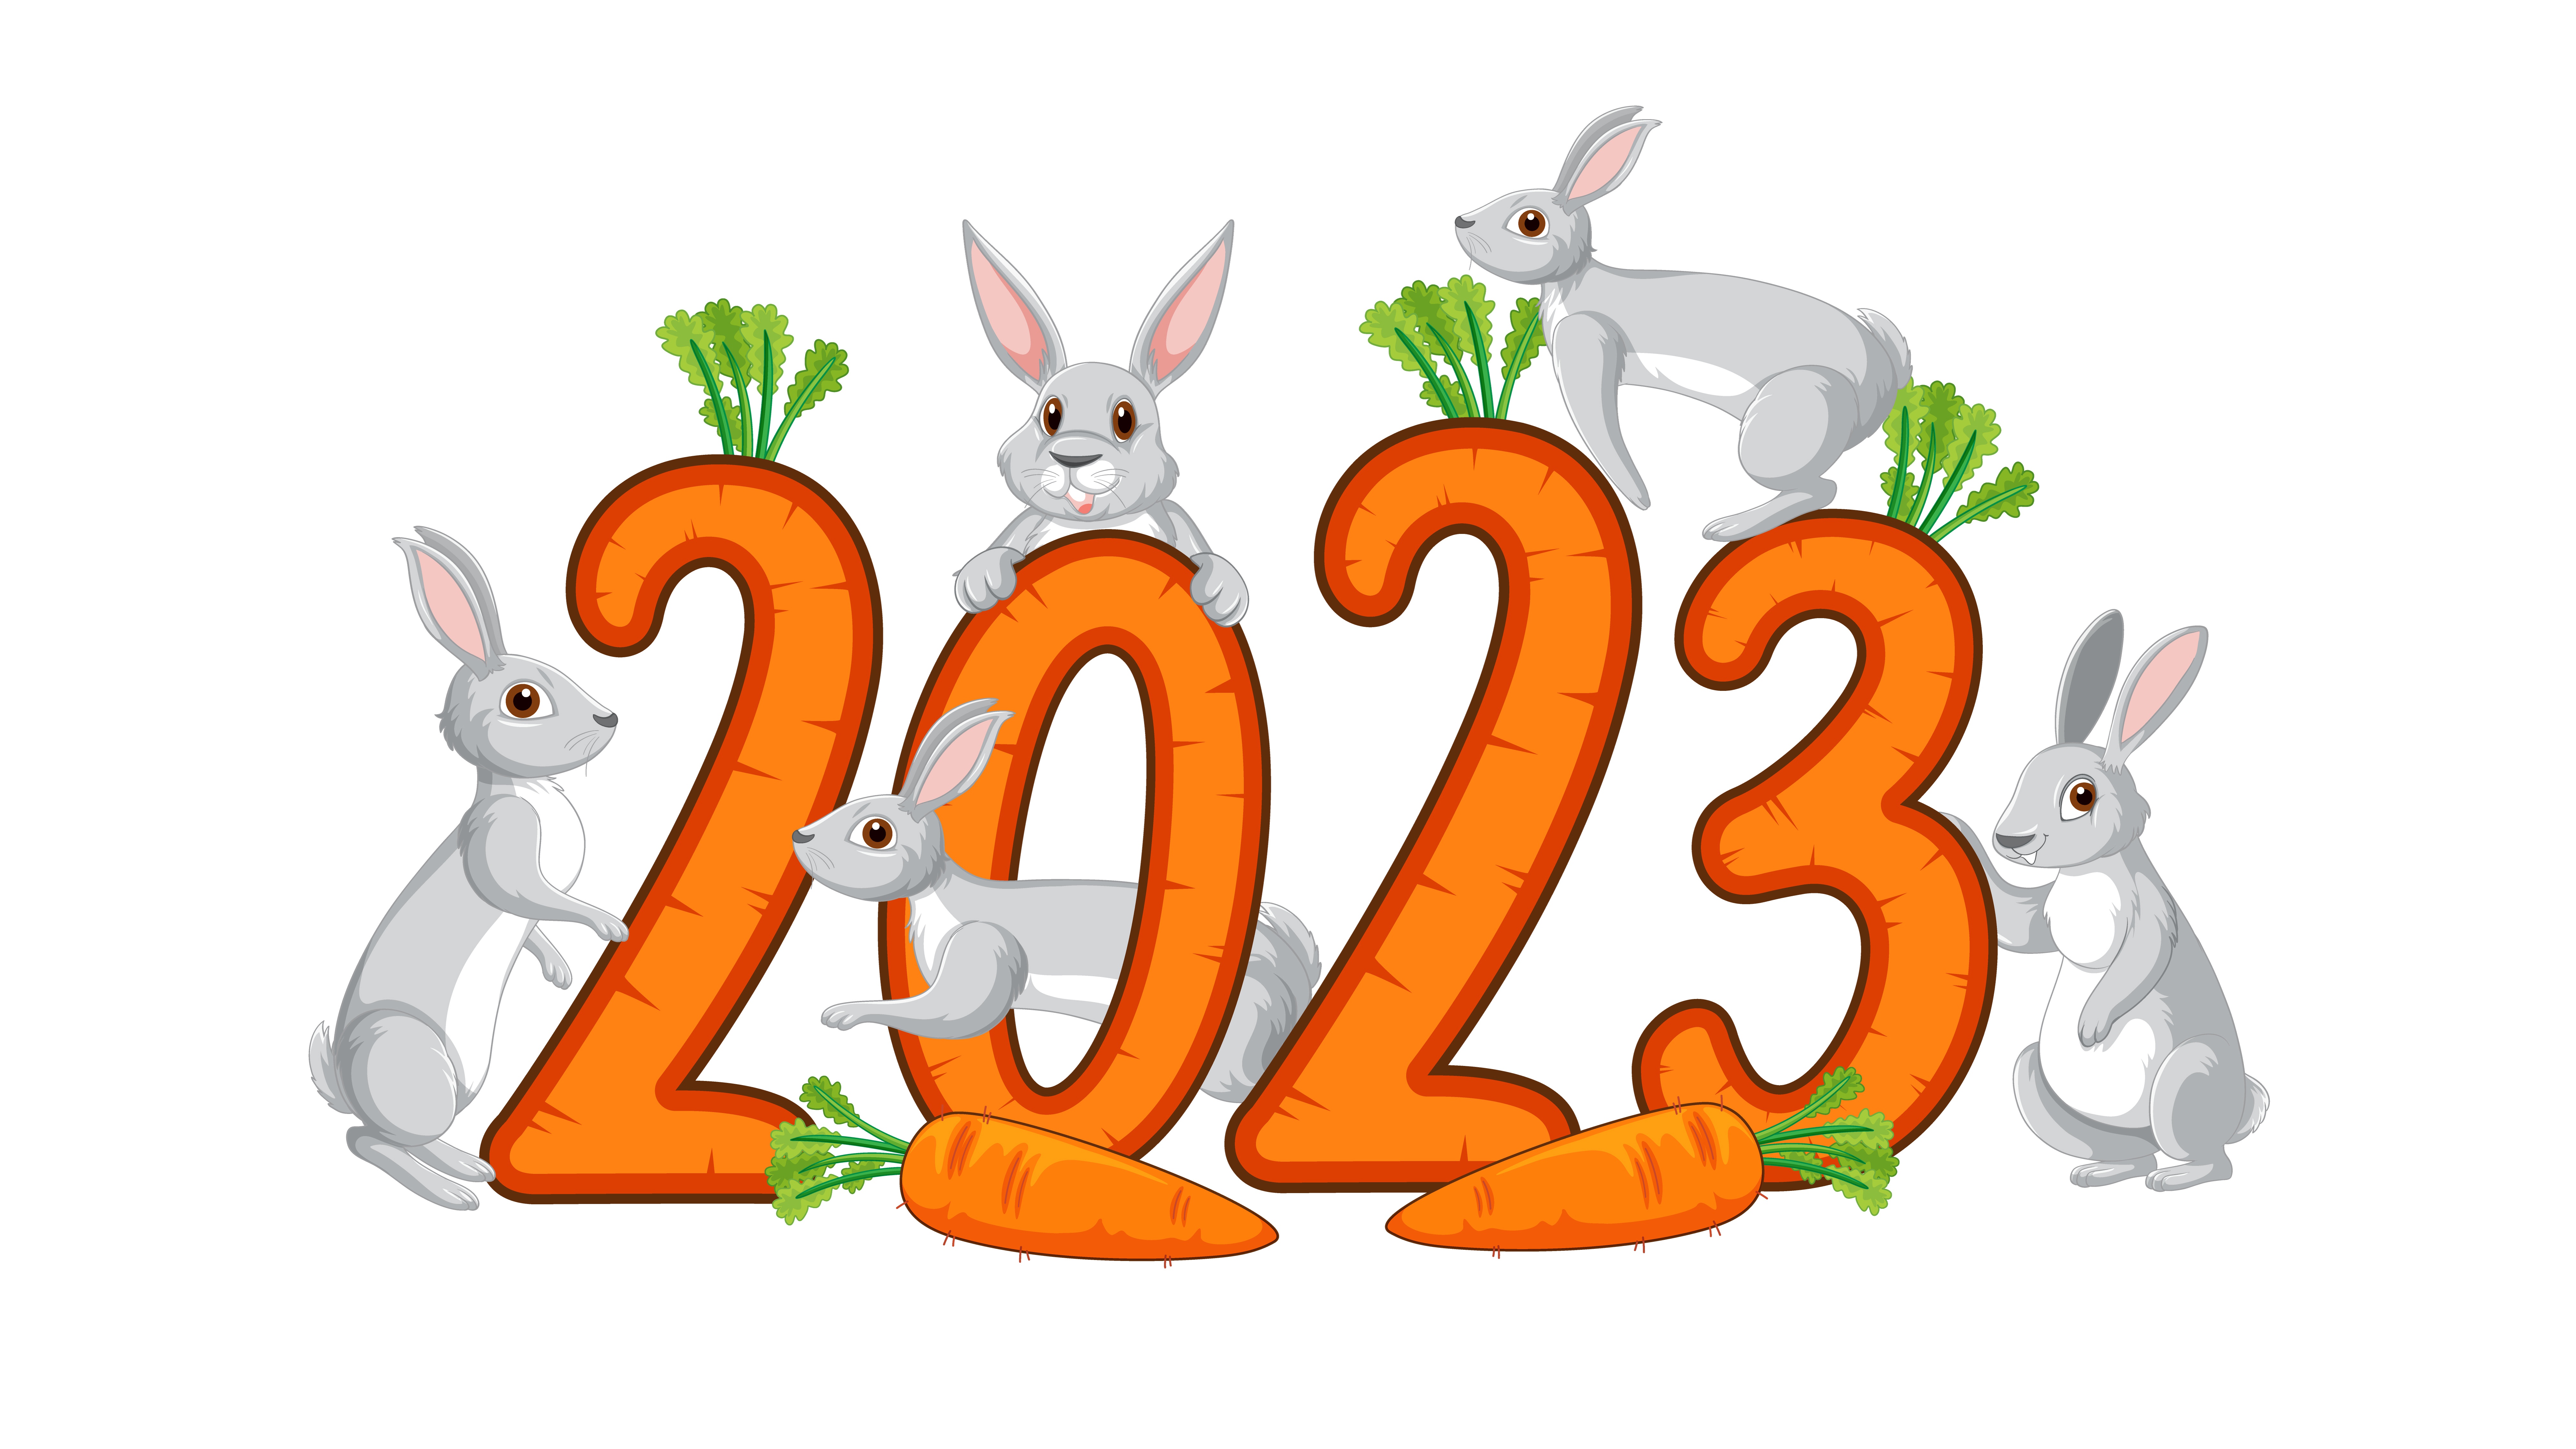 General 8043x4524 2023 (year) rabbits carrots minimalism simple background white background holiday digital art